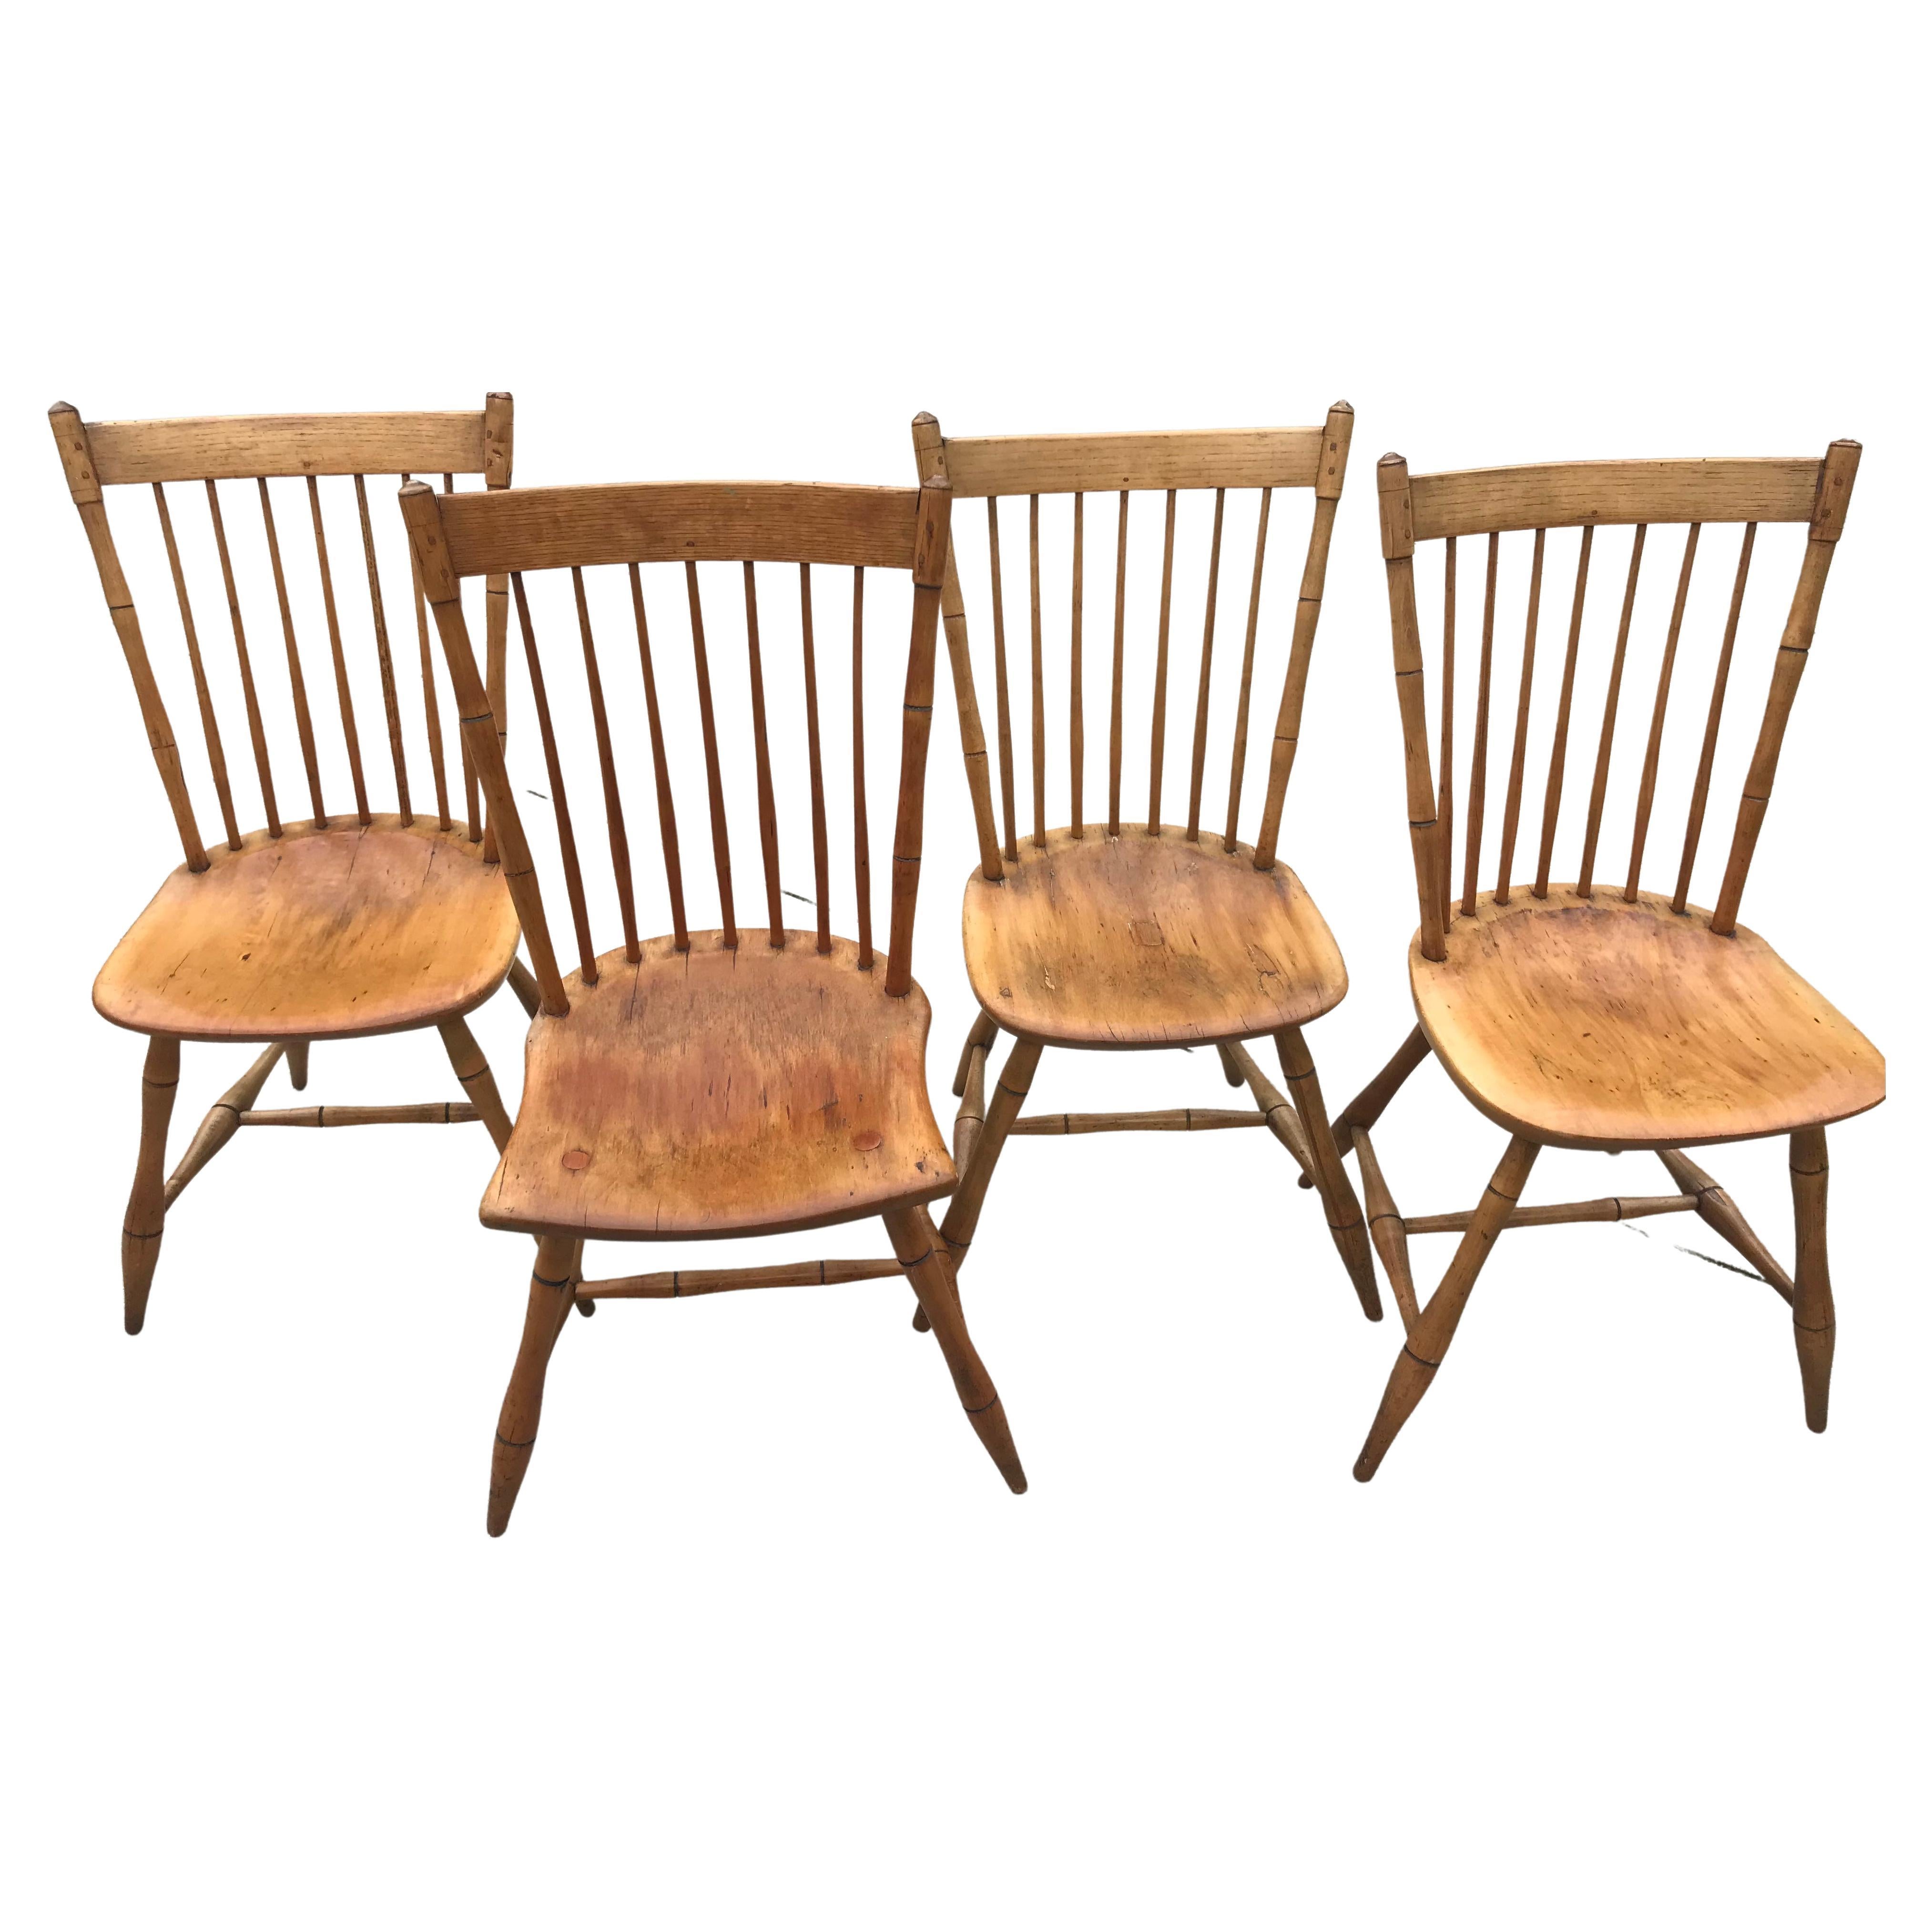 Early 20th Century New England Maple Spindleback Windsor Chairs